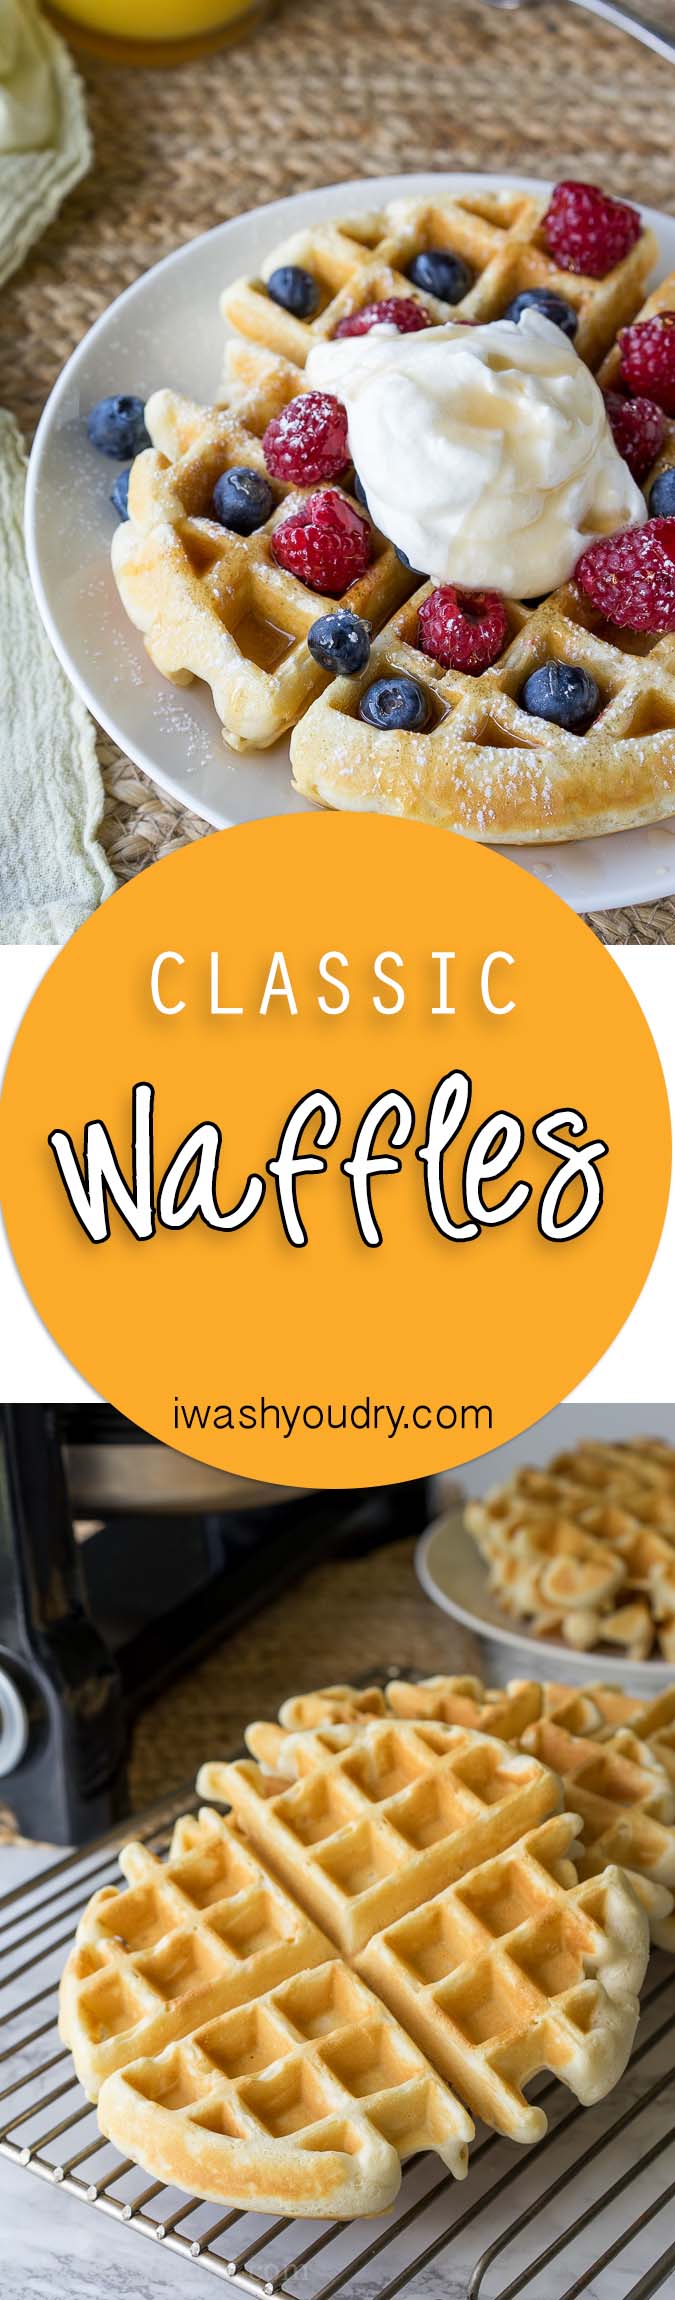 This Classic Waffle Recipe makes perfectly crisp on the outside, fluffy on the inside waffles that are to die for! 